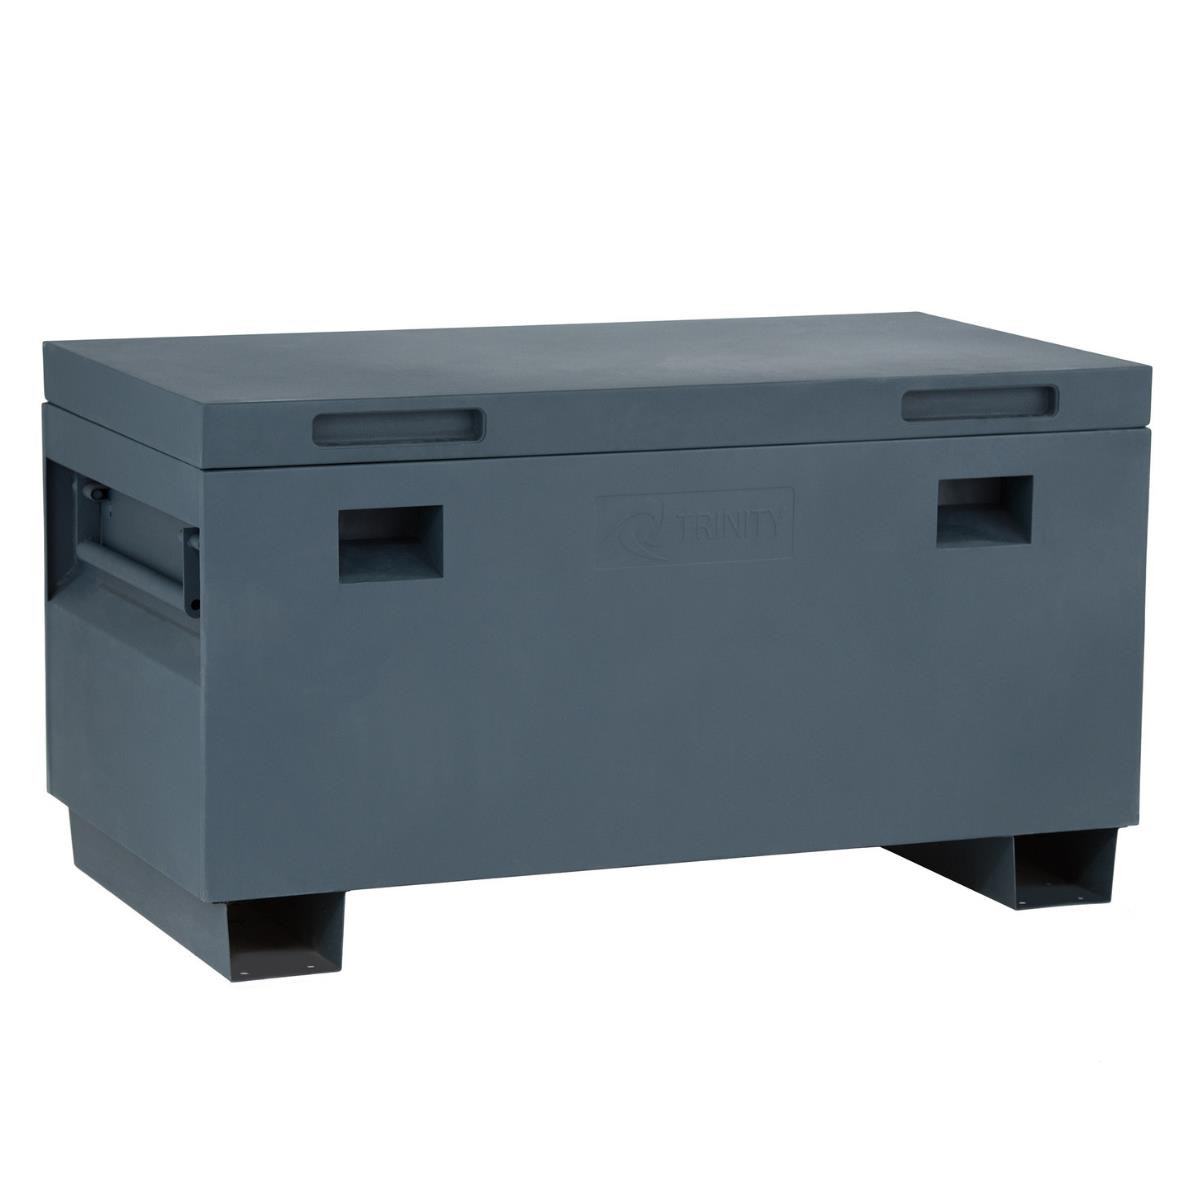 Picture of Trinity TXKPGR-0501 45 in. Matte Rust-Resistant Powder Coated Job Site Box